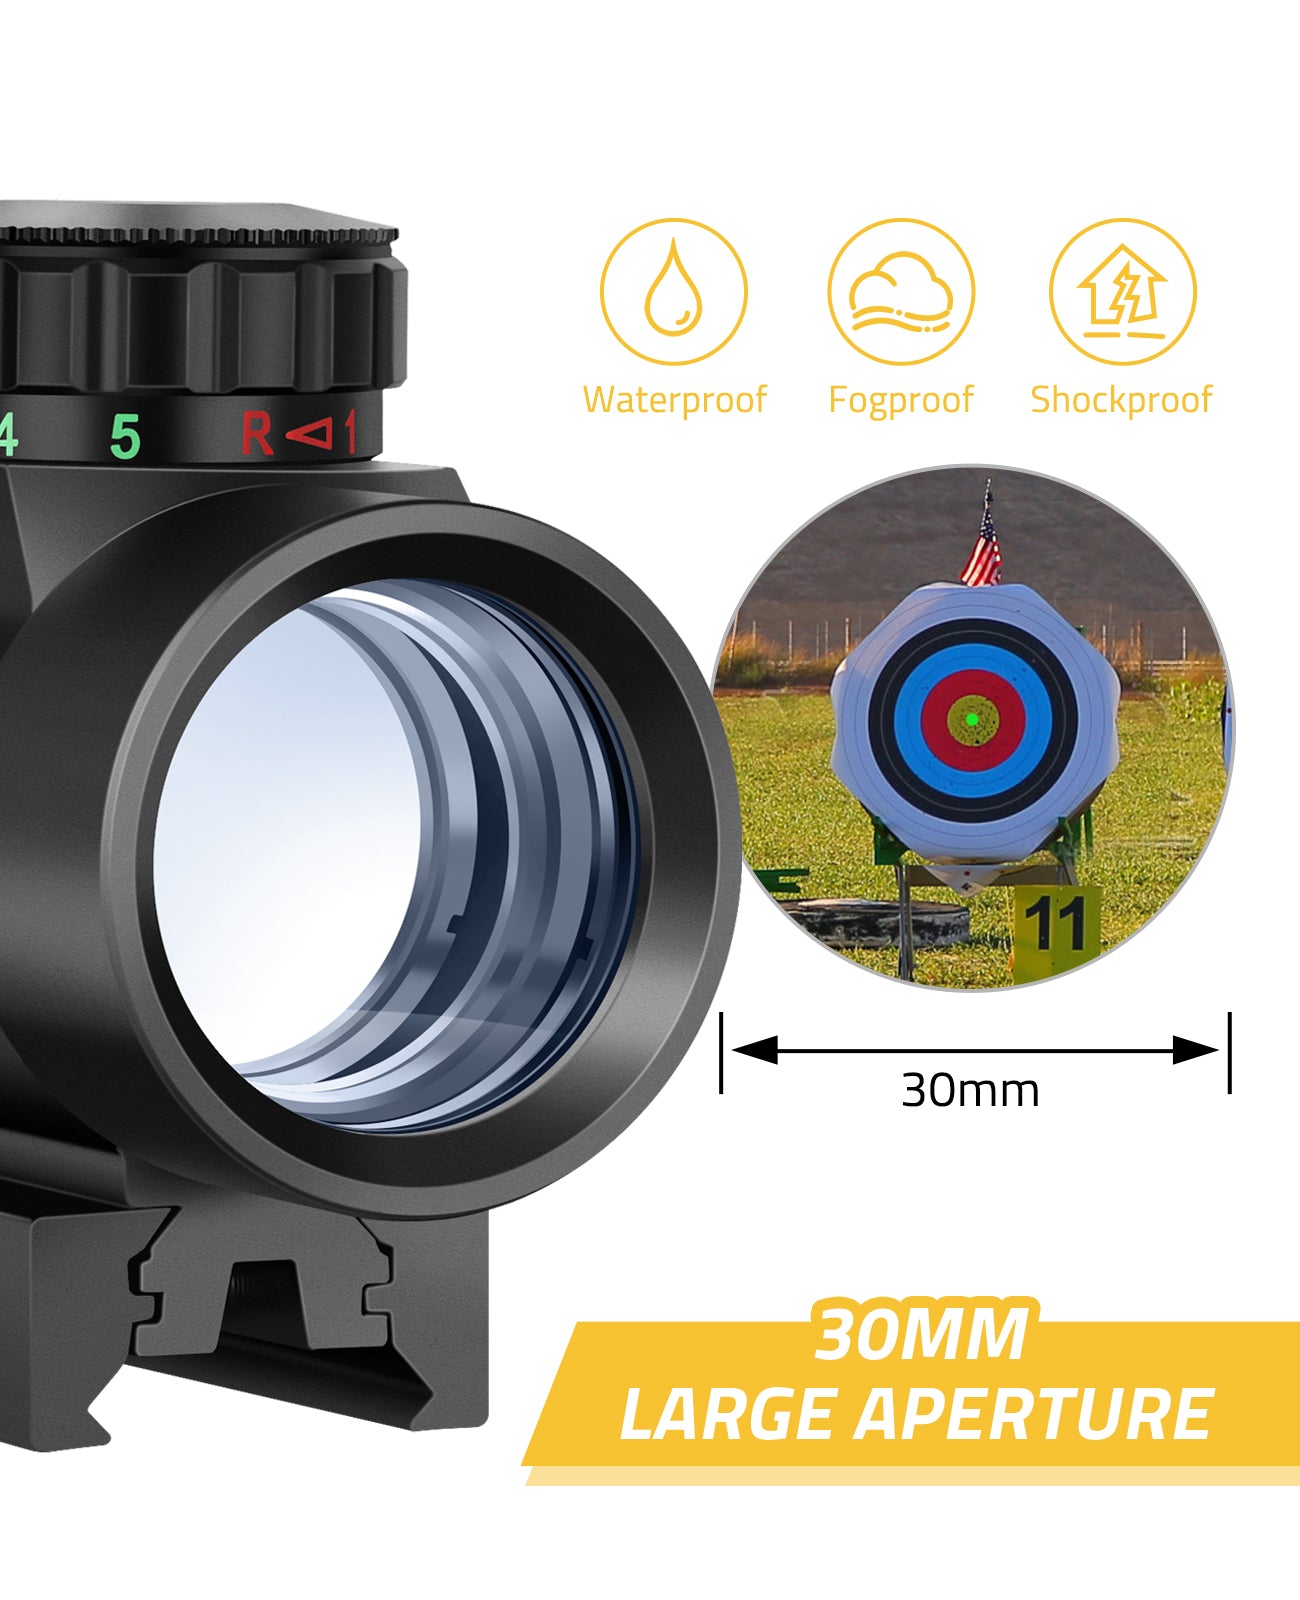 1x30mm Red Dot Sight with Waterproof, Fogproof and Shockproof Features